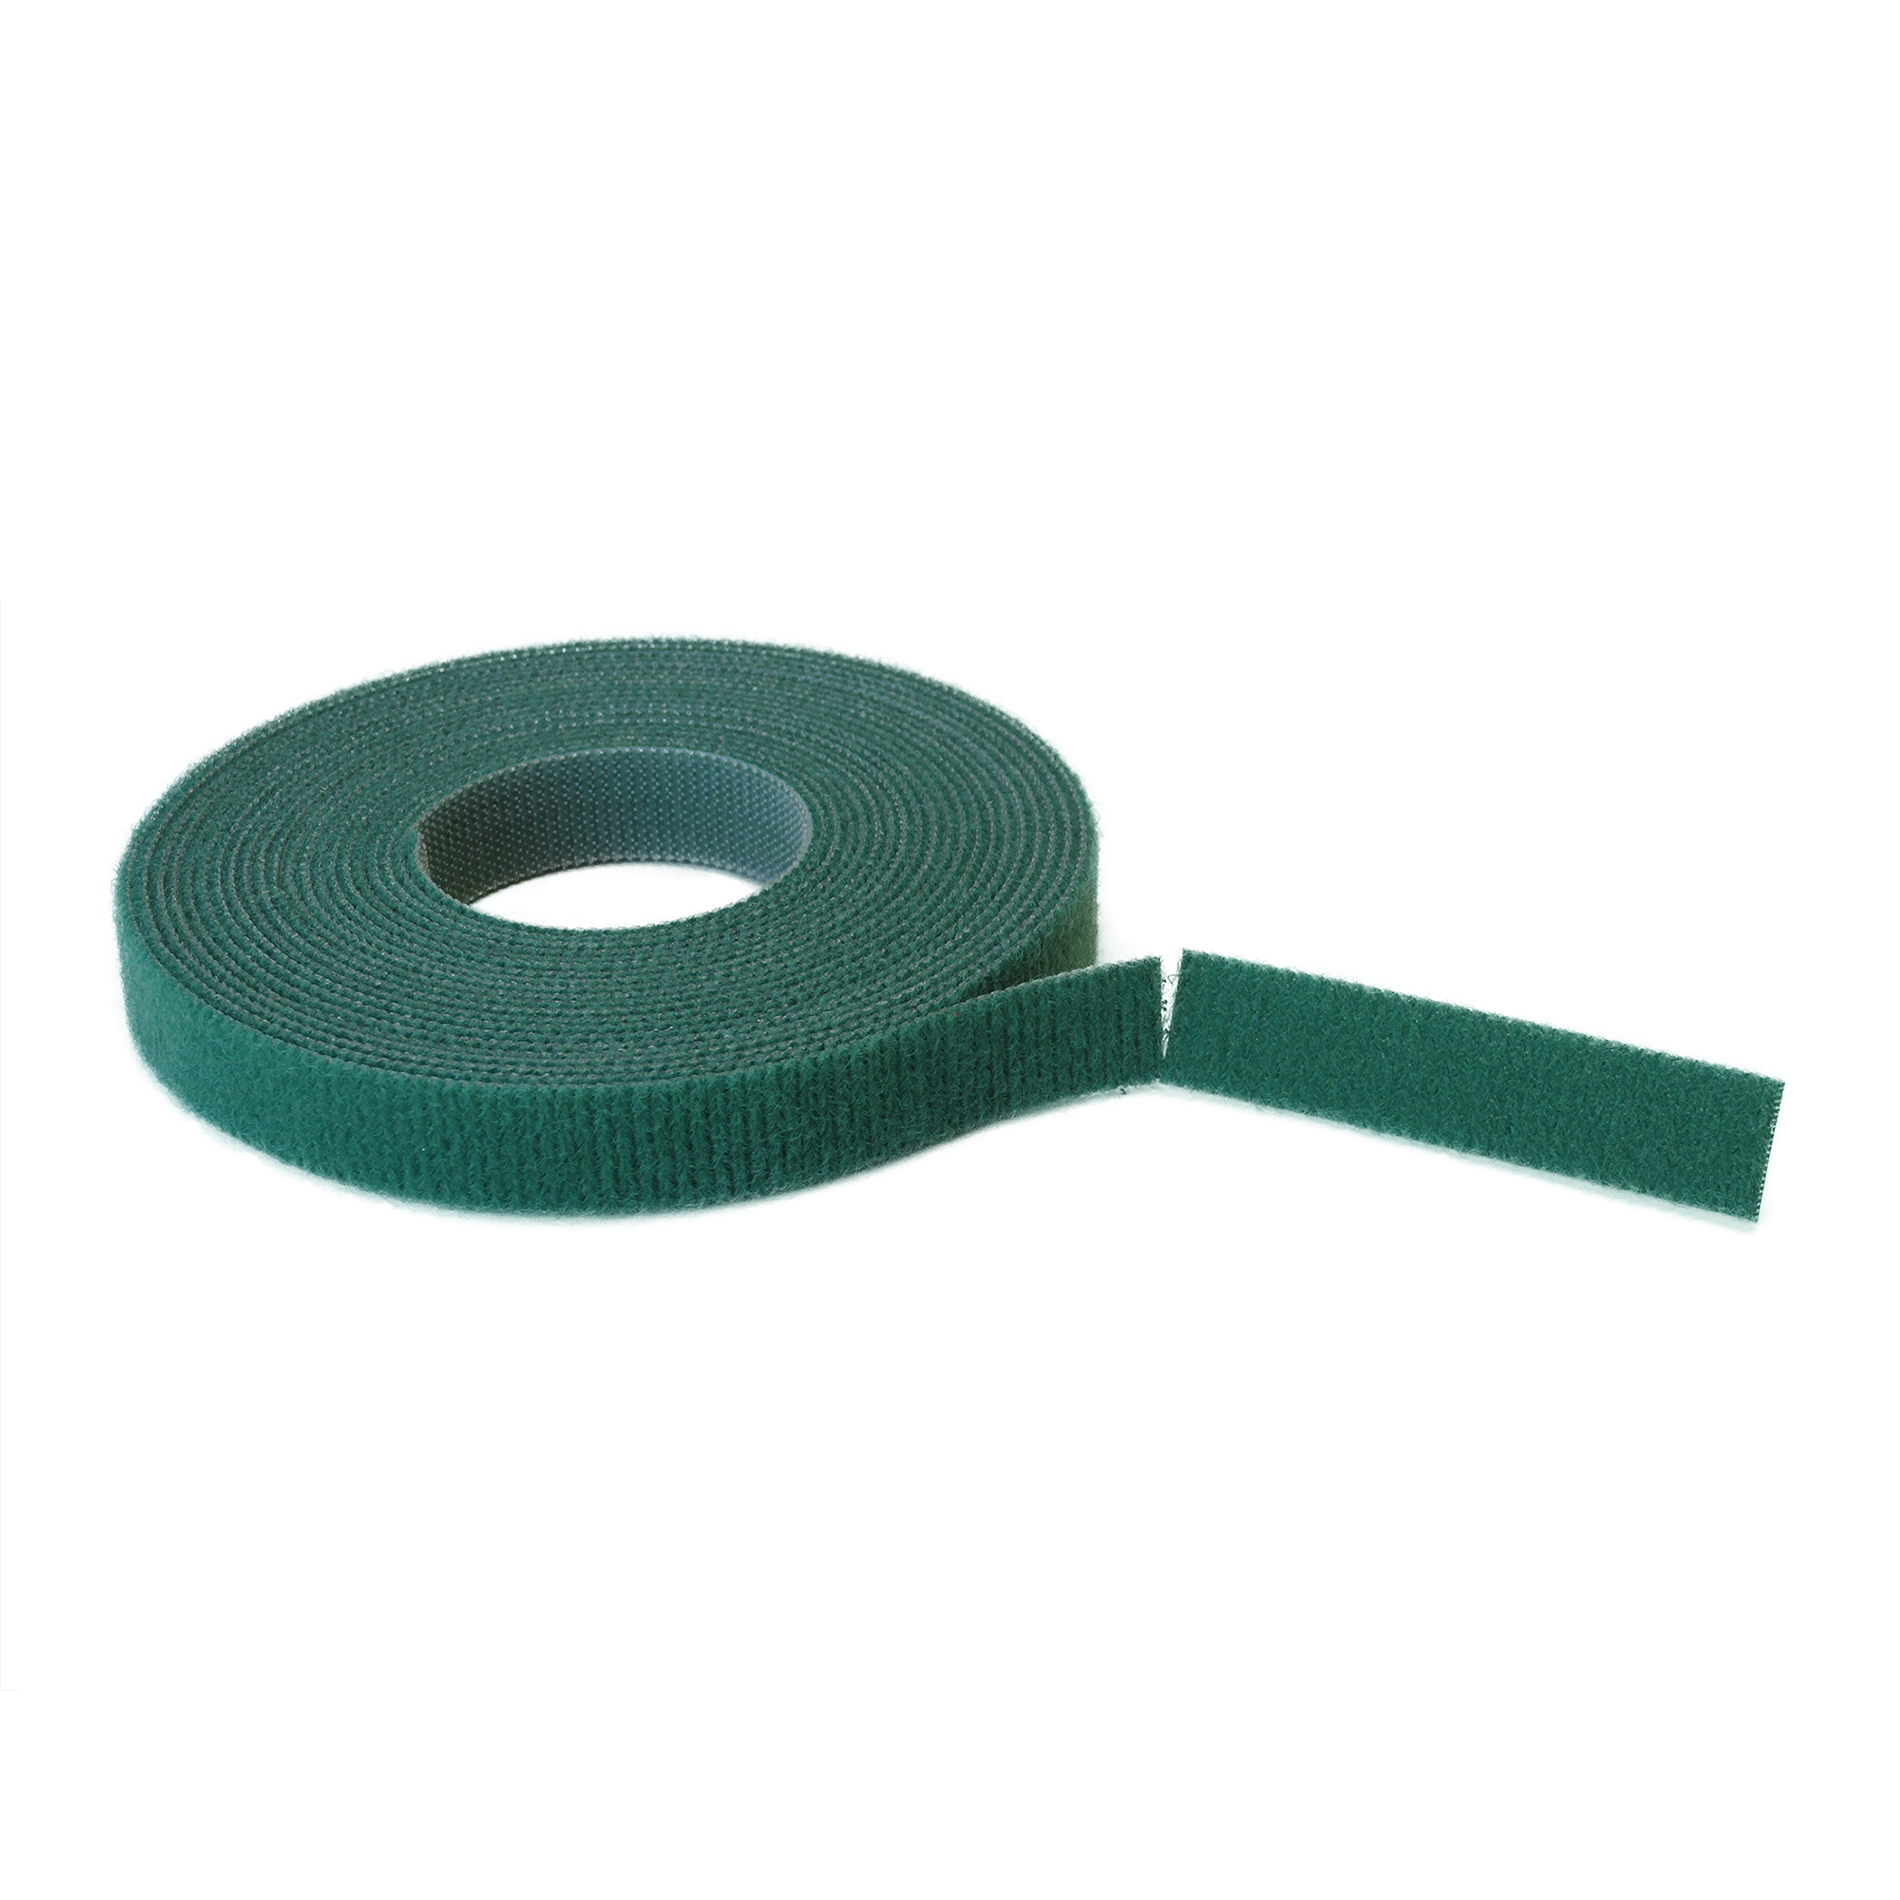 Velcro Fastening Tape 1 Kit Adhesive Back by Aircraft Spruce